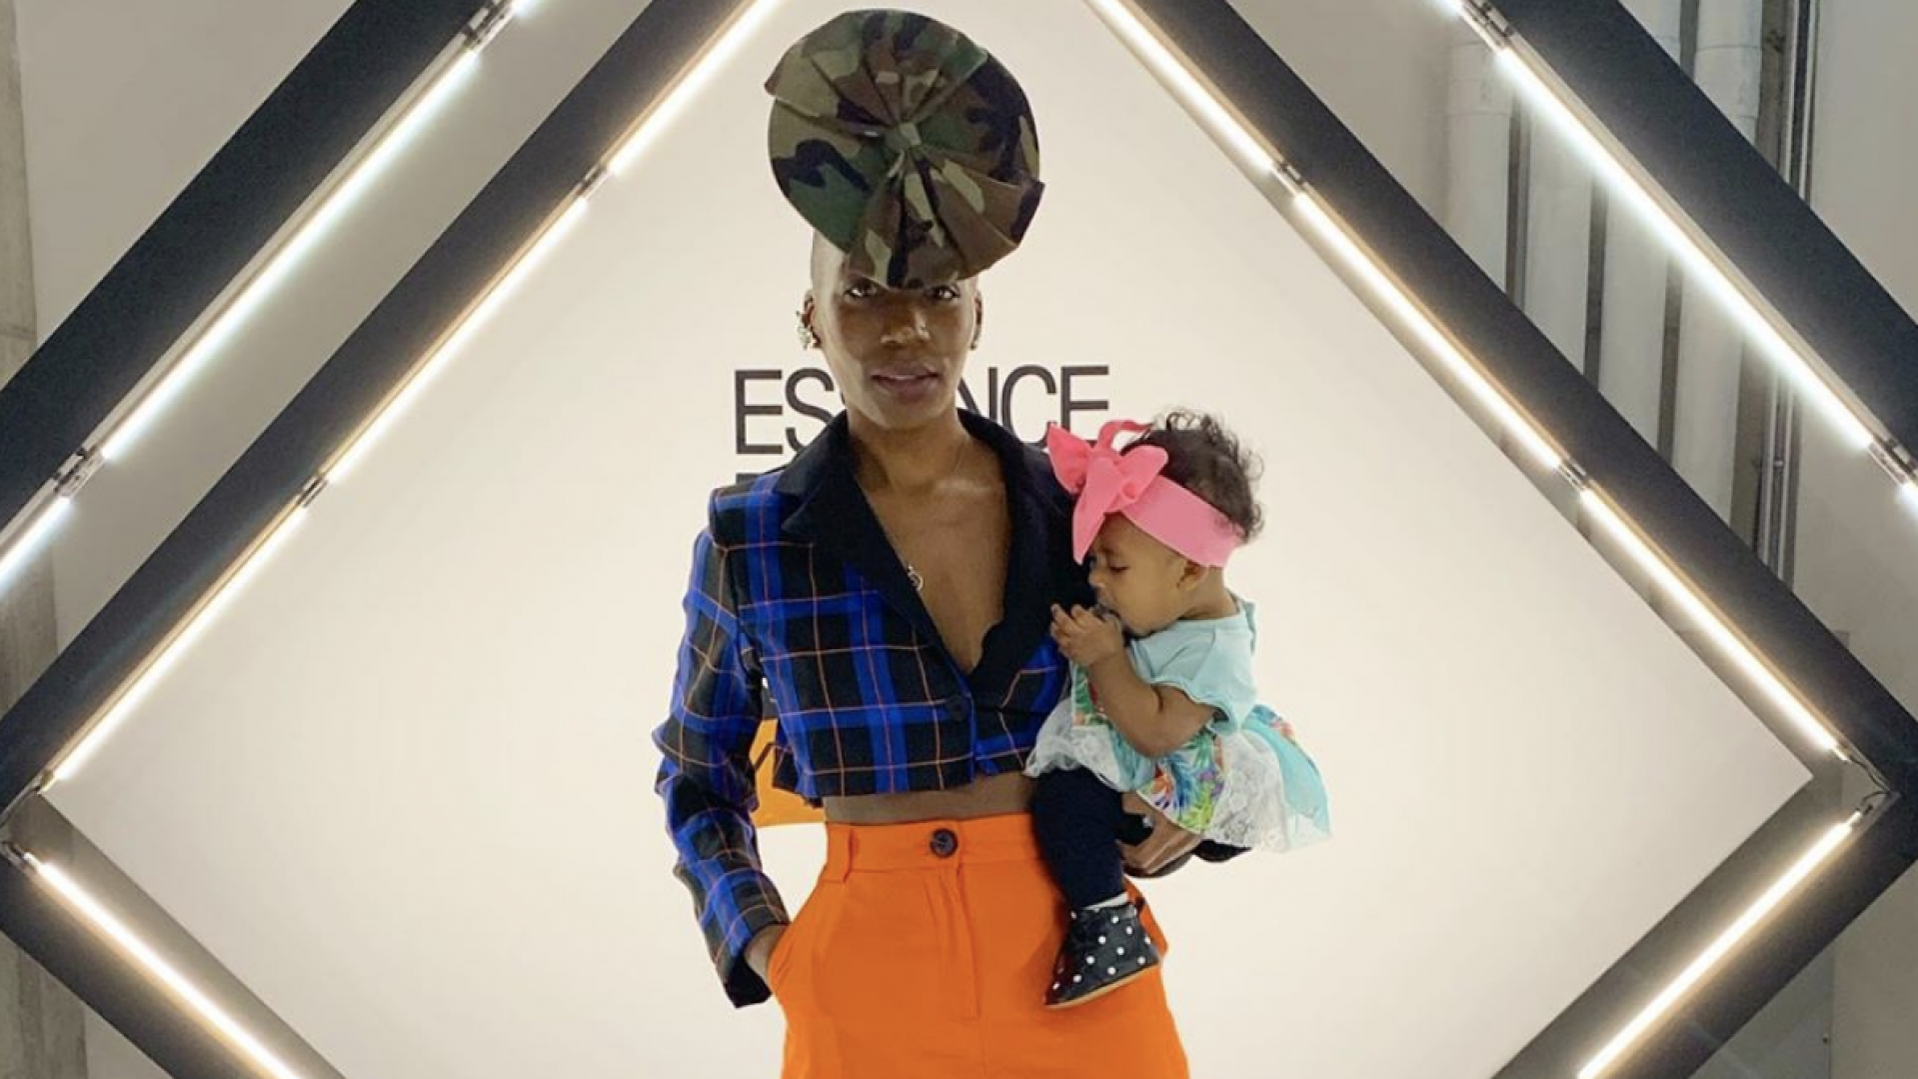 Street Style Squad Goals These Dynamic Duos Came To Slay At Essence Fashion House Essence